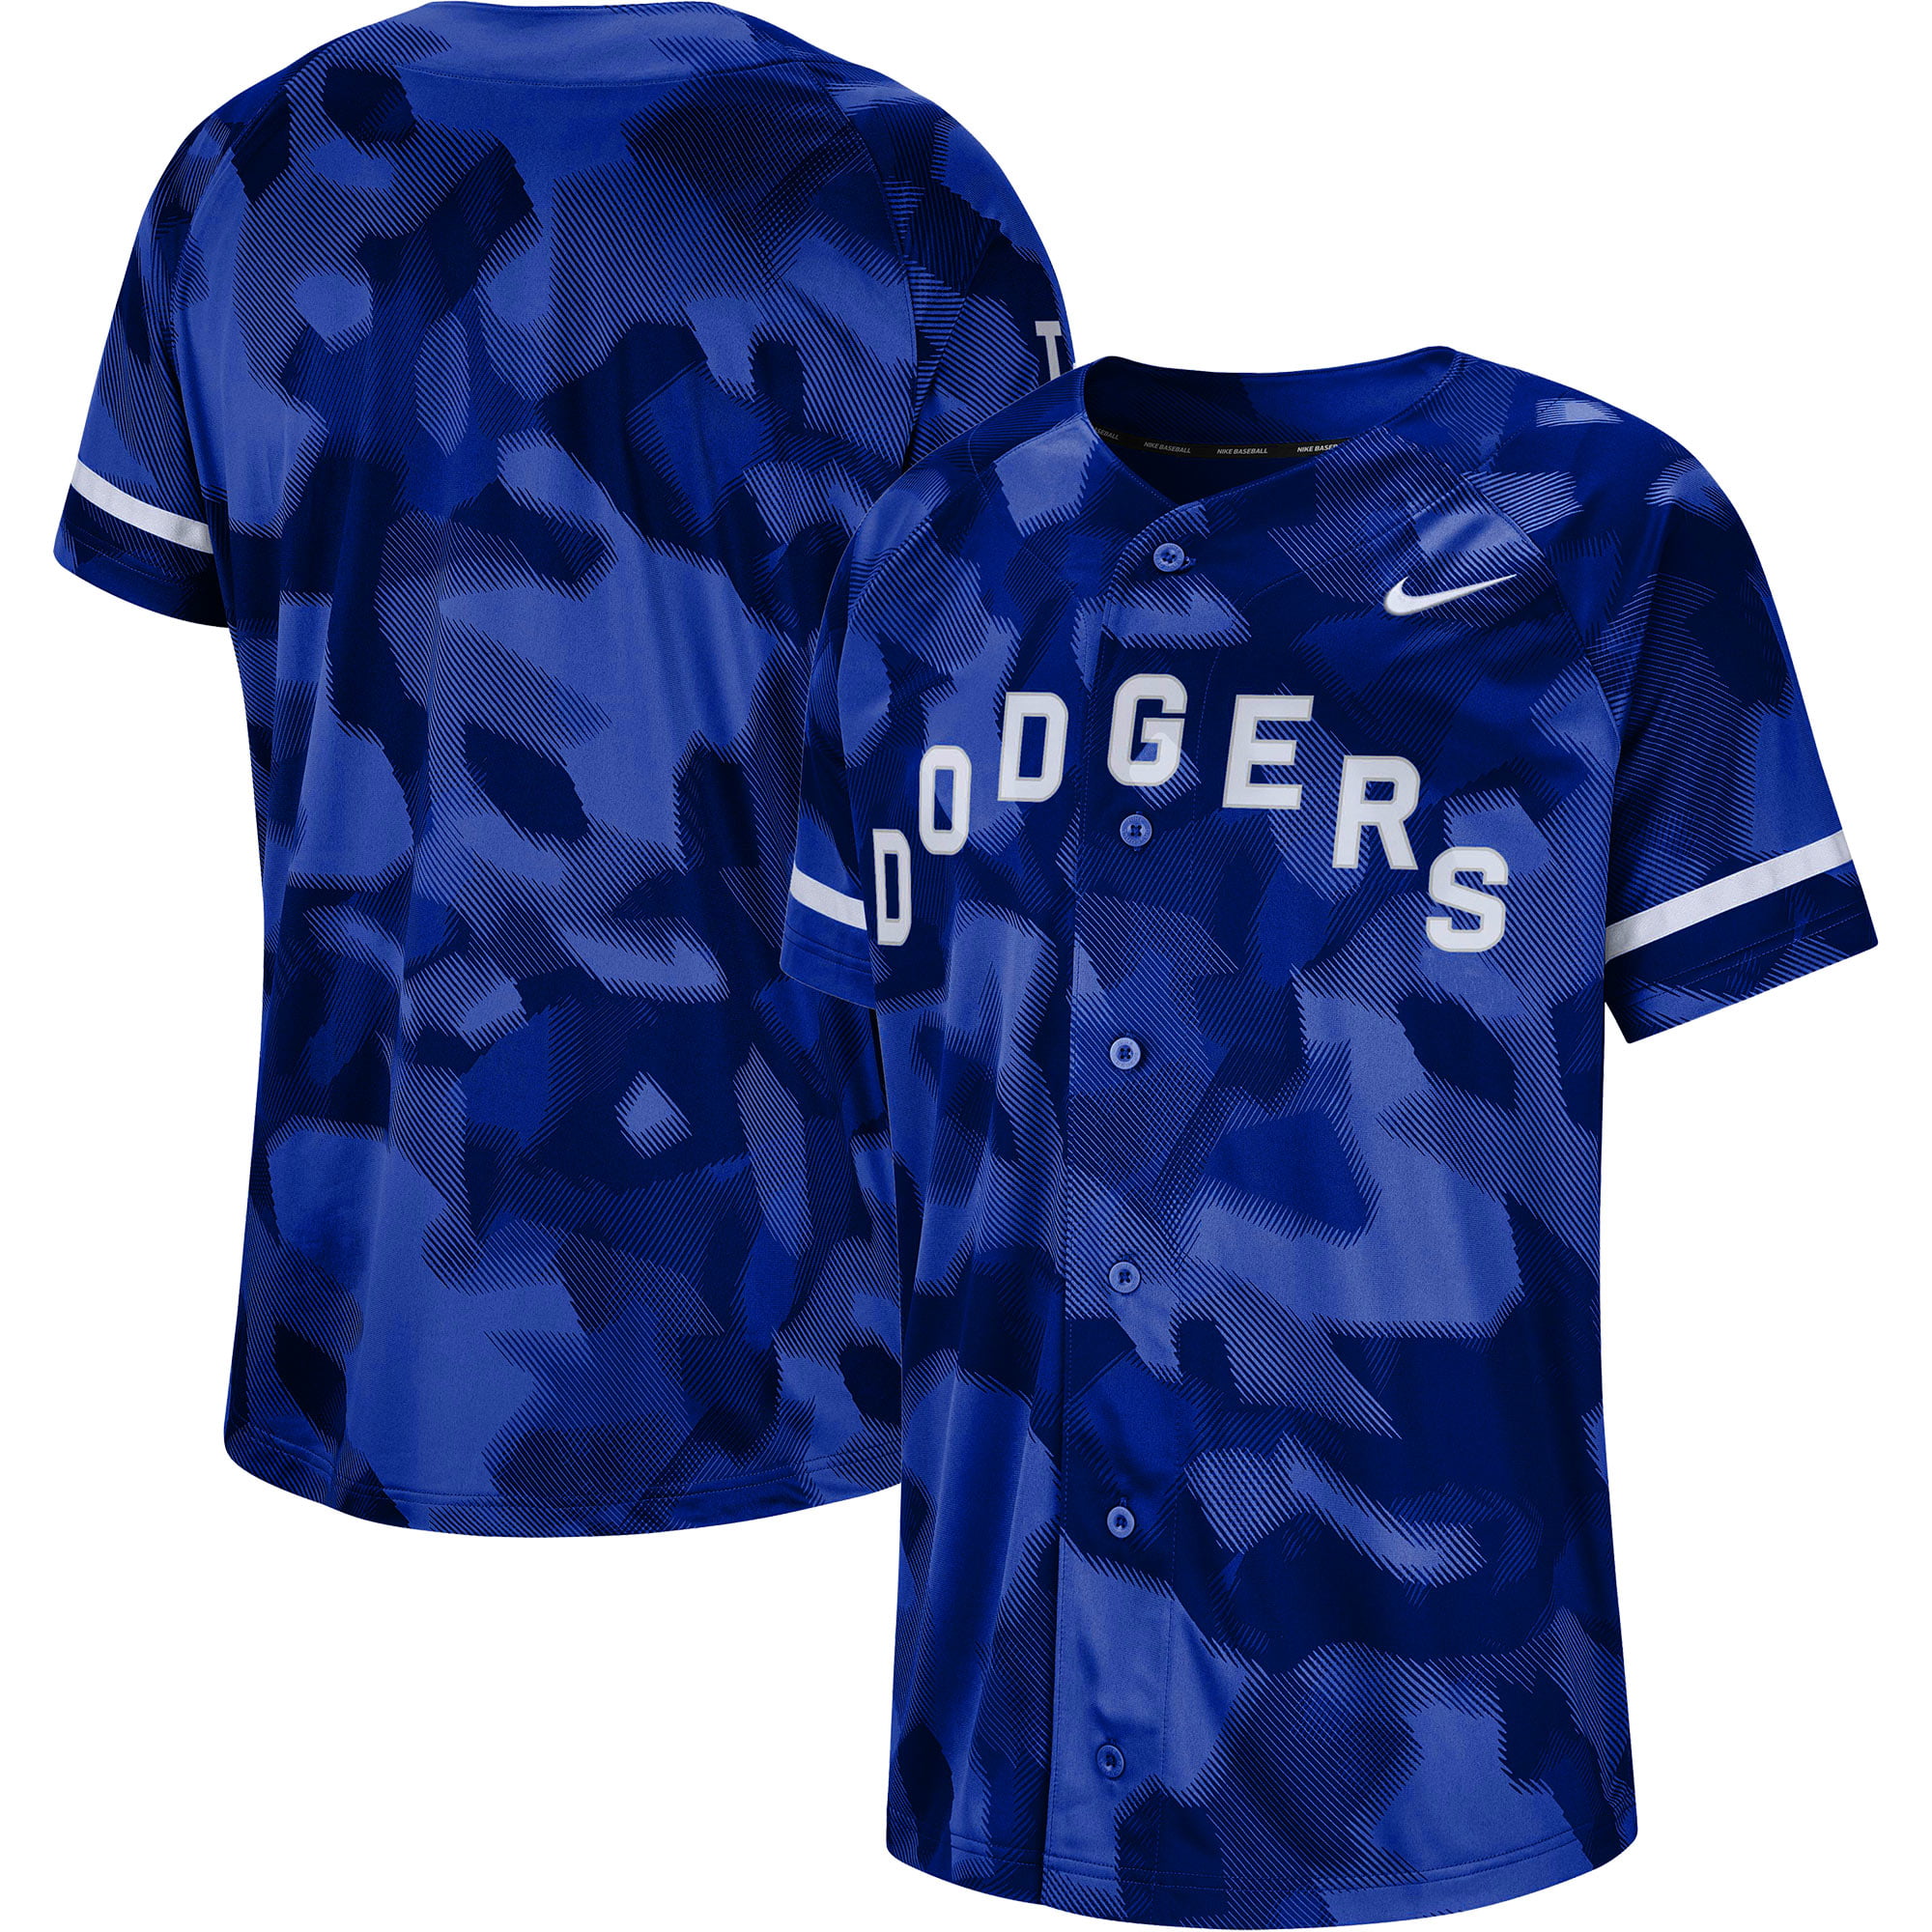 dodgers military jersey